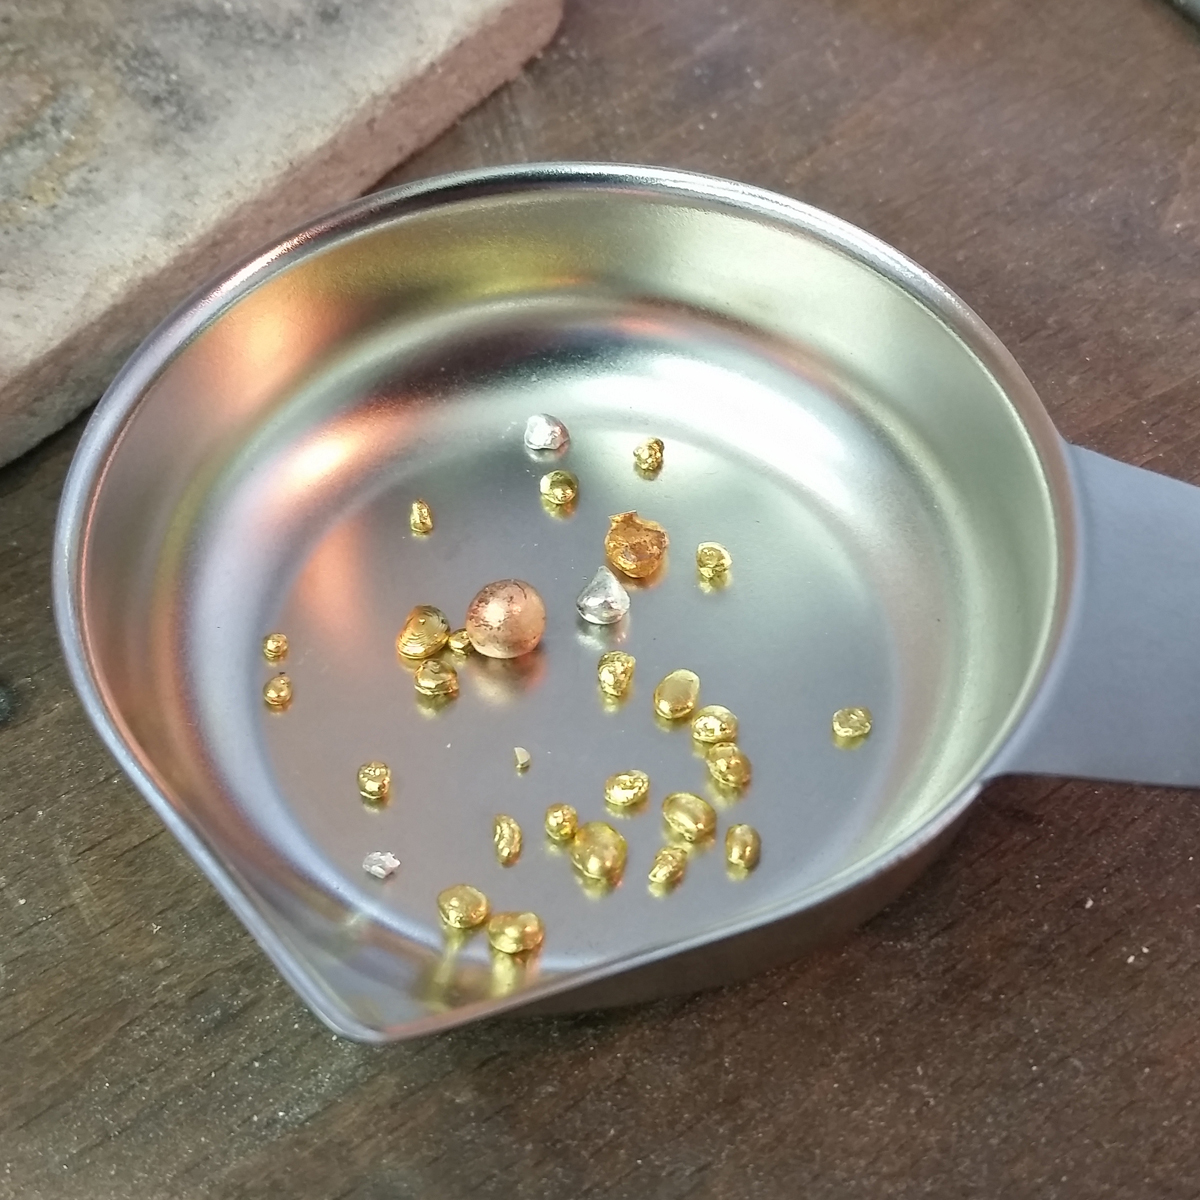 Grains of copper, silver and Fairtrade gold in a small weighing dish on a workbench.